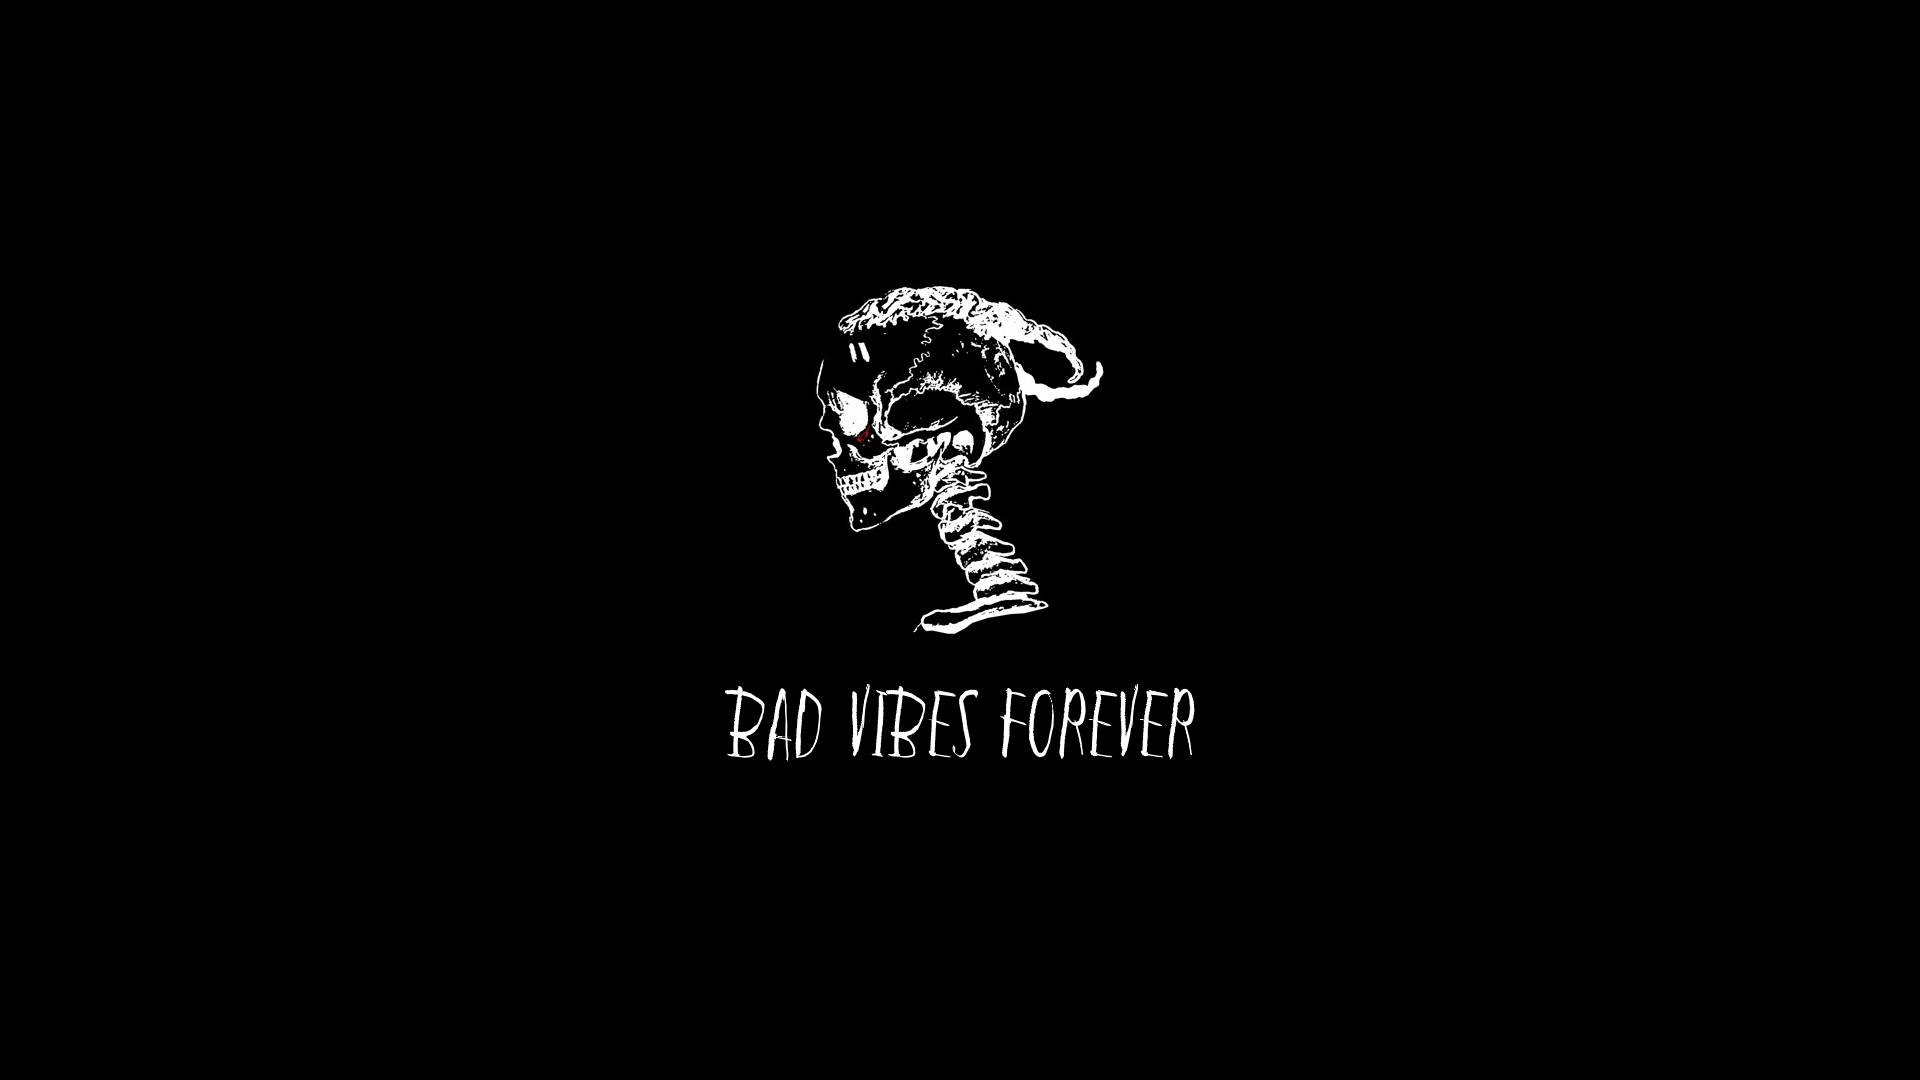 Aggregate more than 78 bad vibes forever wallpaper